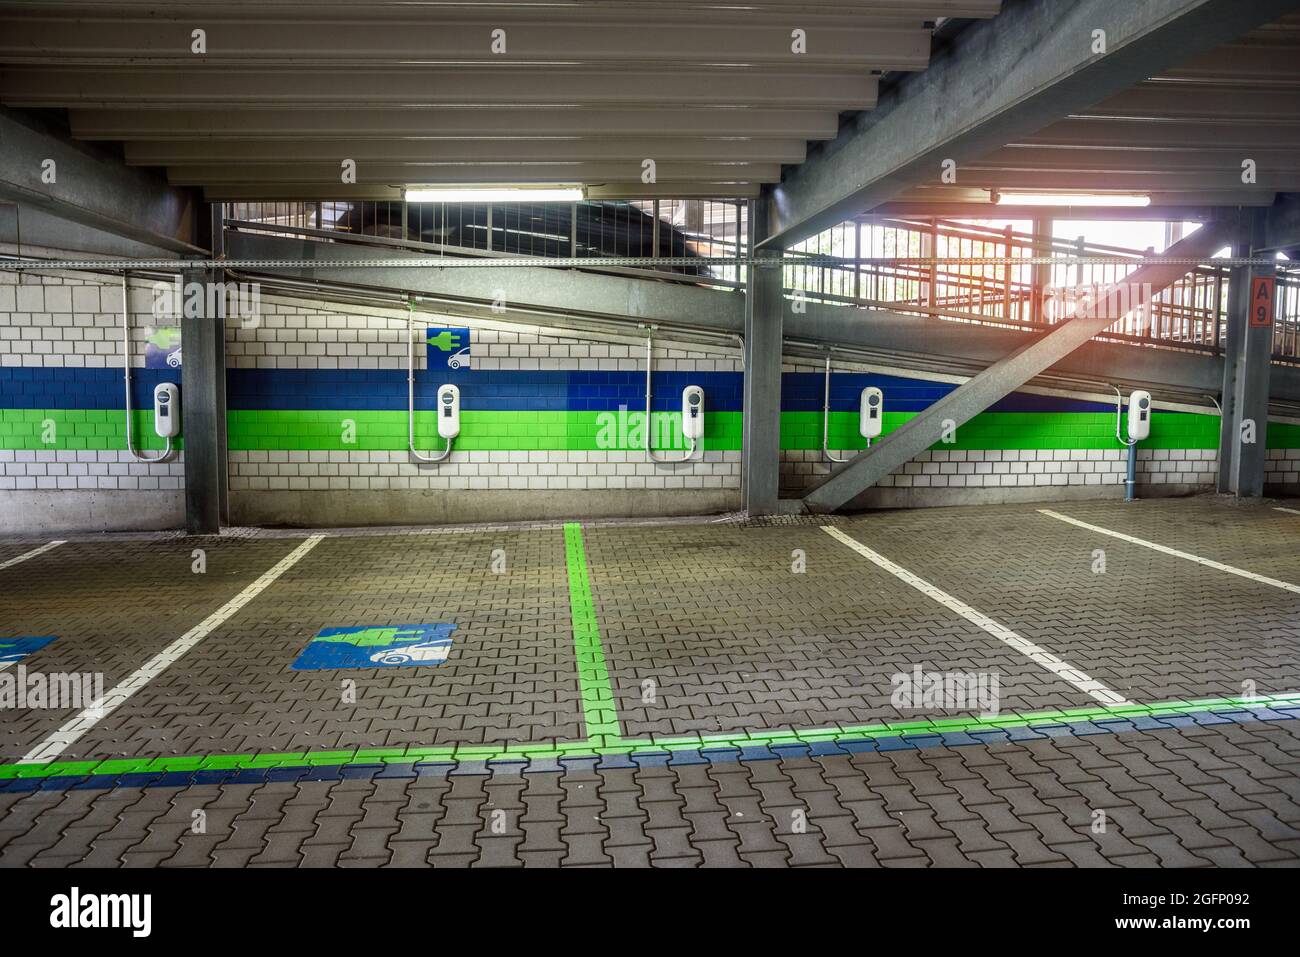 Deserted charging points for electric cars in a muty-stories car park Stock Photo